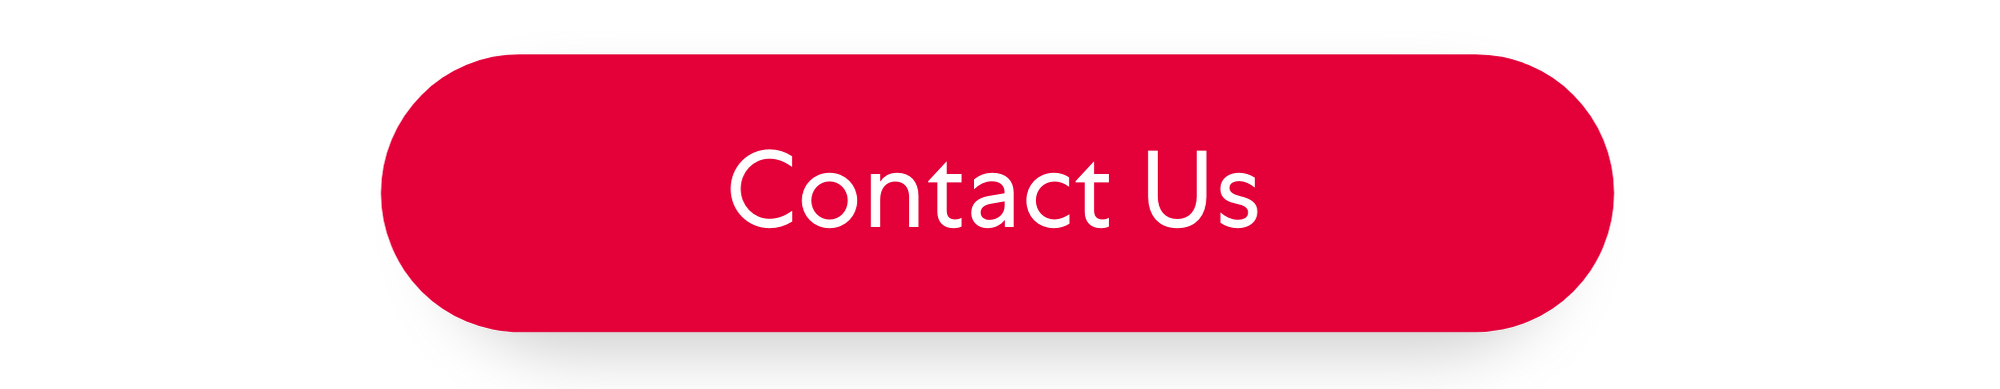 CONTACTUS-BUTTON-RED.png